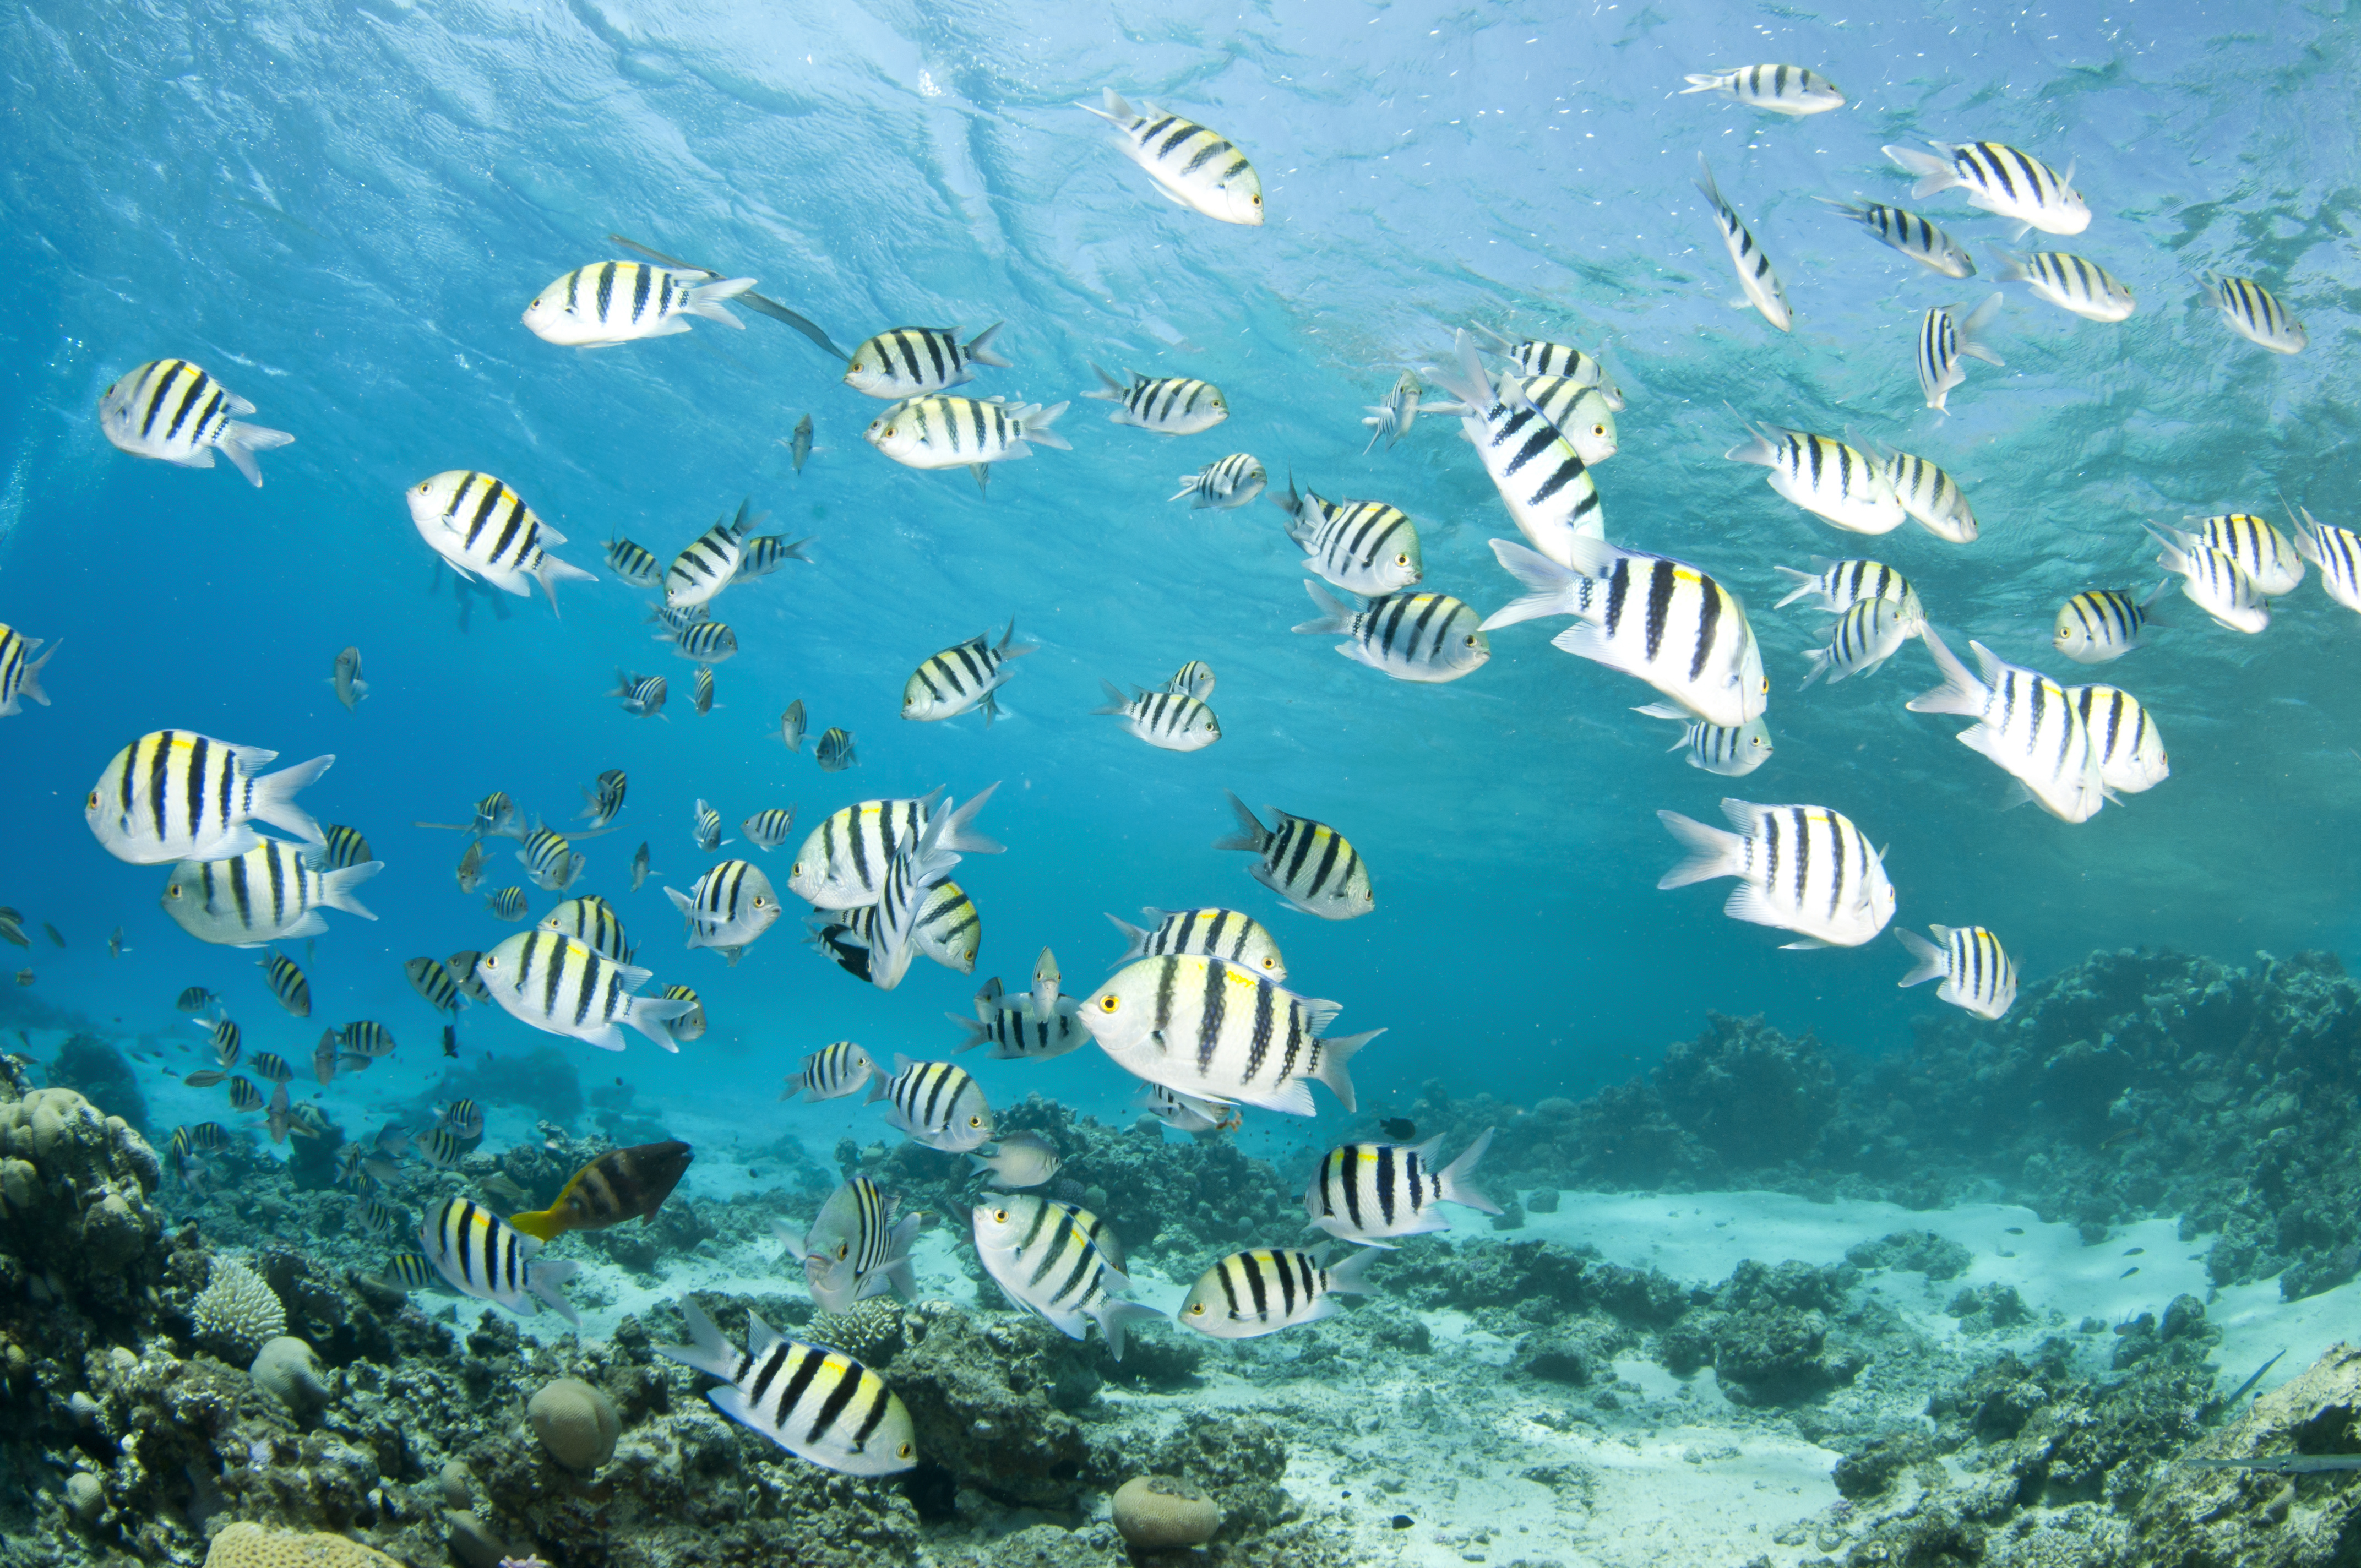 School of fish playing in the warm waters of the Caribbean